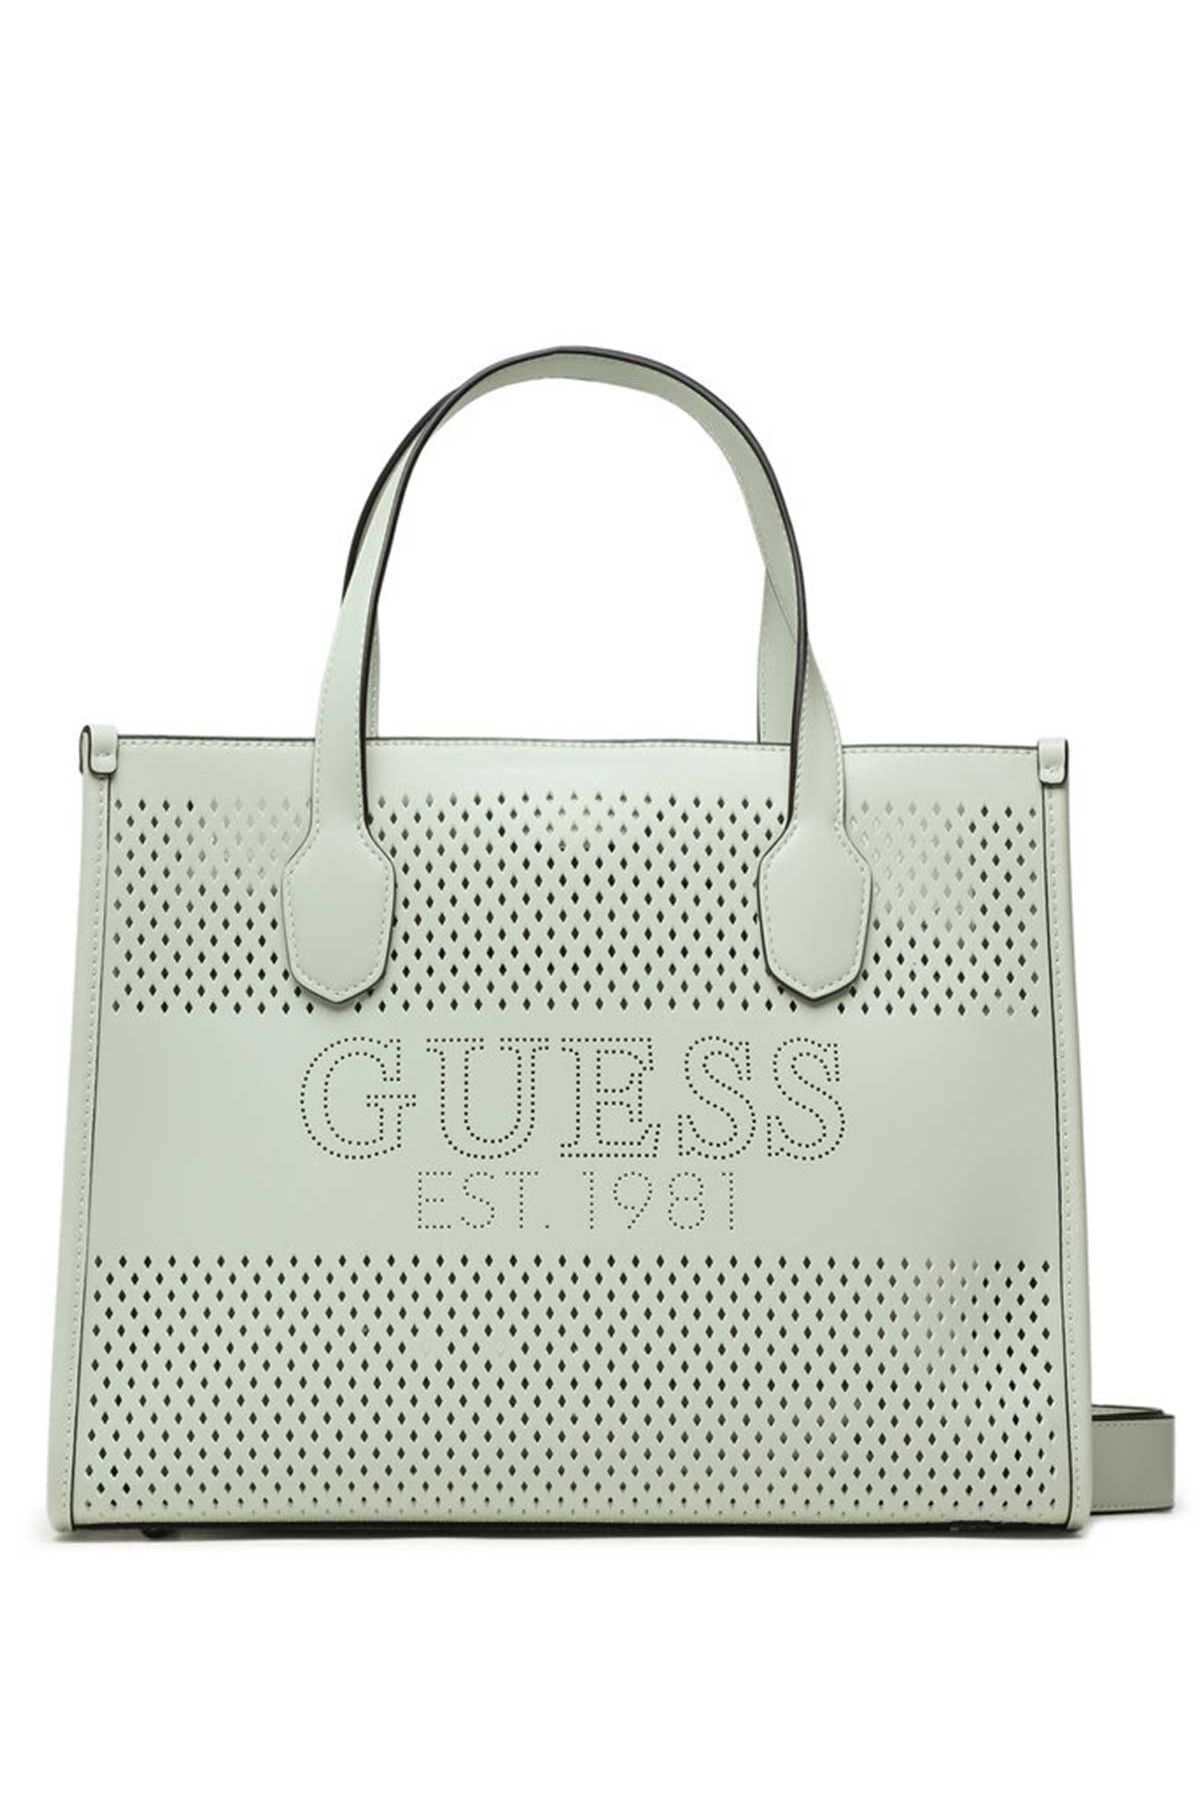 Guess Rothenburg Purse and Matching Single Zip Wallet Natural Multi - Guess  bag - | Fash Brands